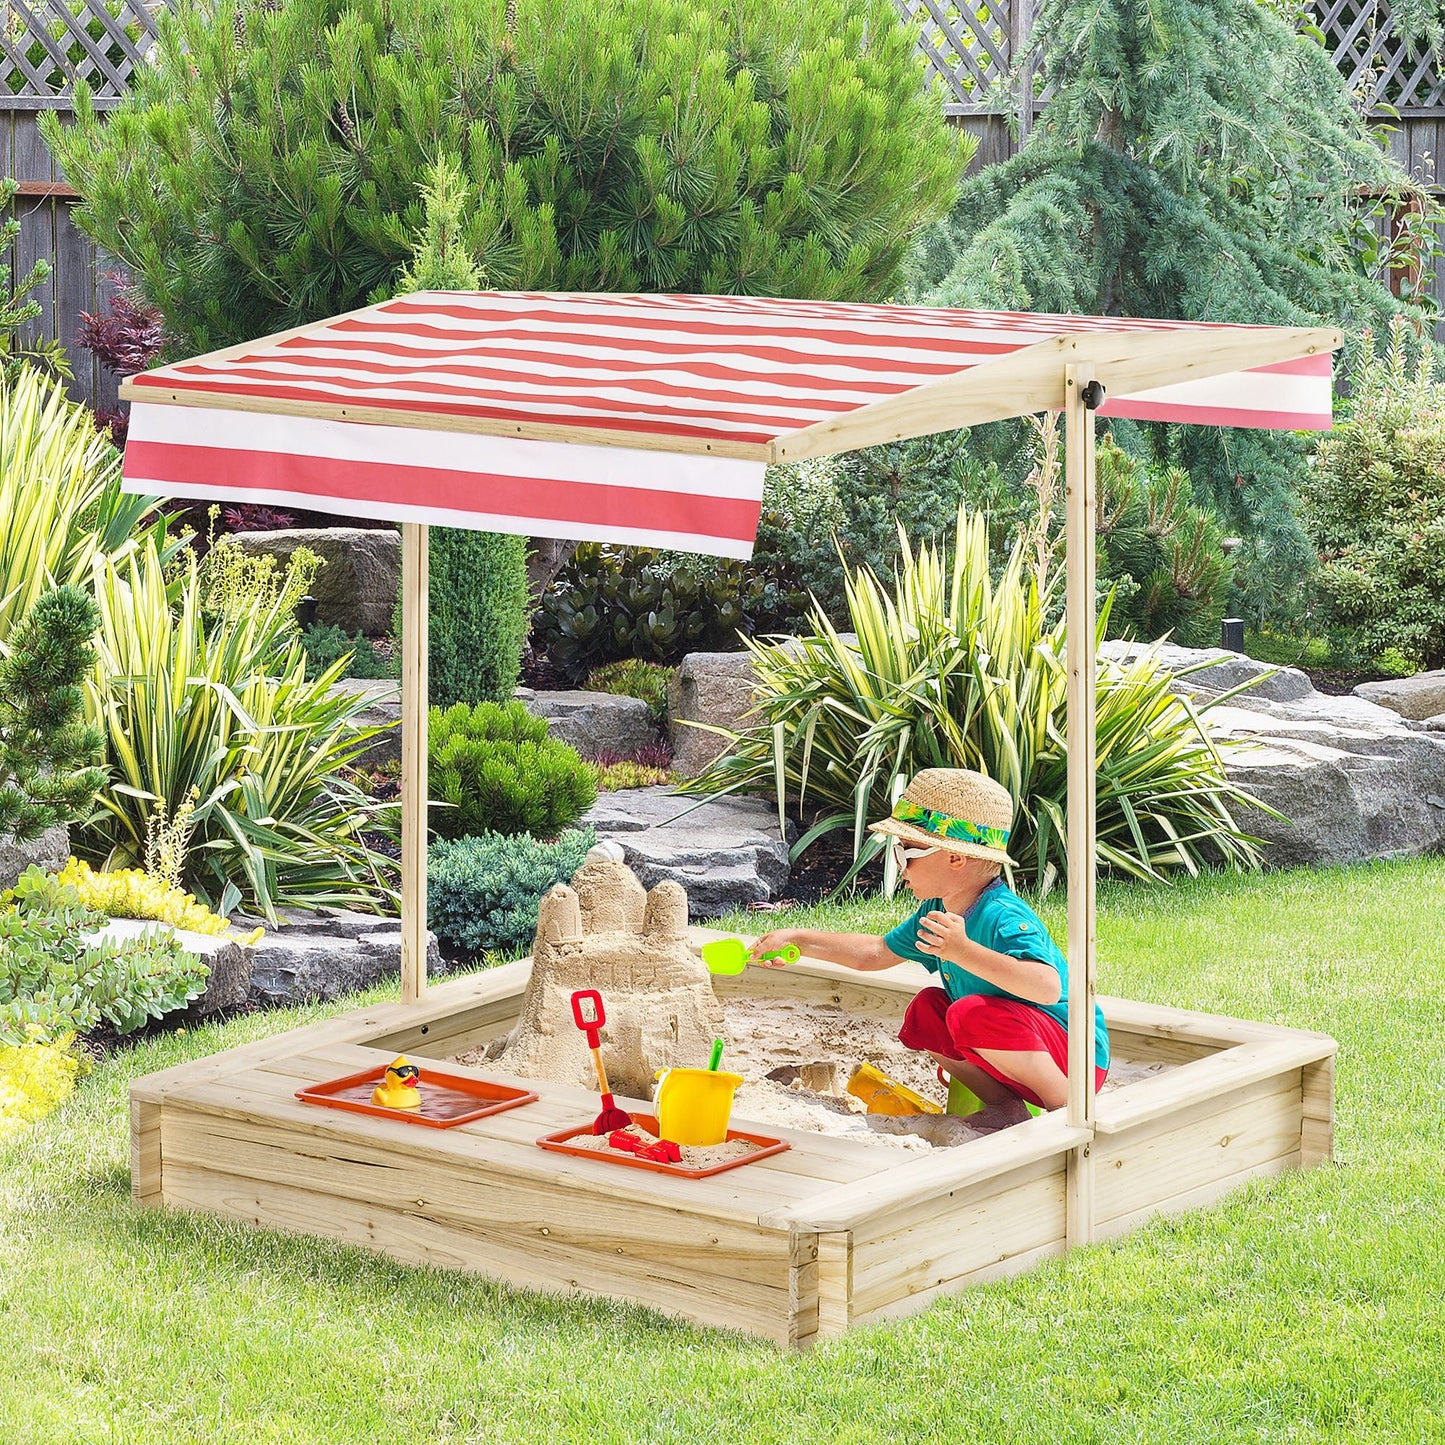 Toys and Games-Kids Wooden Sandbox, Covered Children Sand Playset Outdoor, w/ Adjustable Canopy Shade, Bottom Liner, Seat, Plastic Basin, Natural - Outdoor Style Company